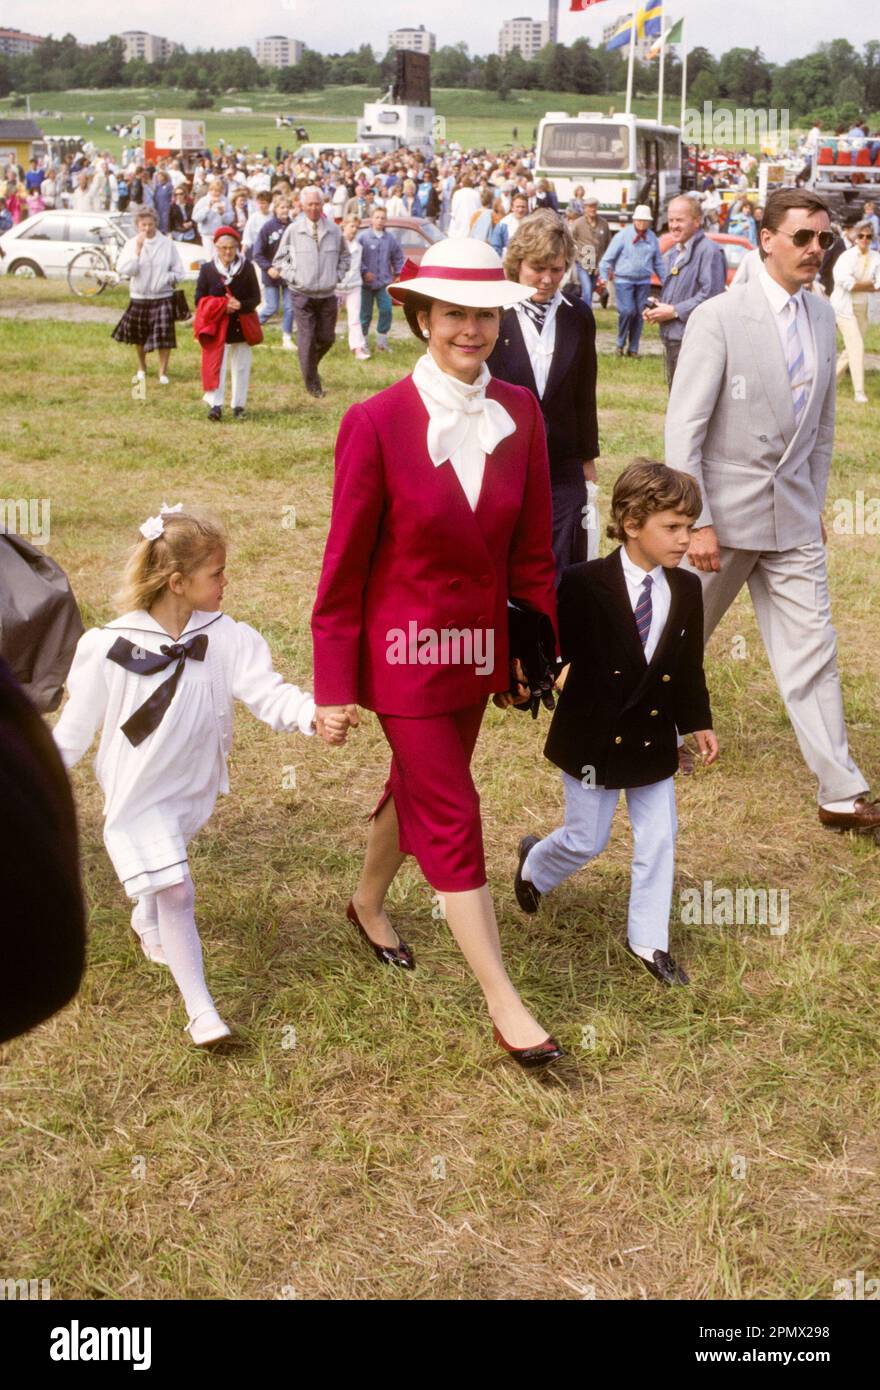 QUEEN SILVIA OF SWEDEN with prince Carl Philip and Princess Madeleine at equestrian competition in Stockholm Stock Photo